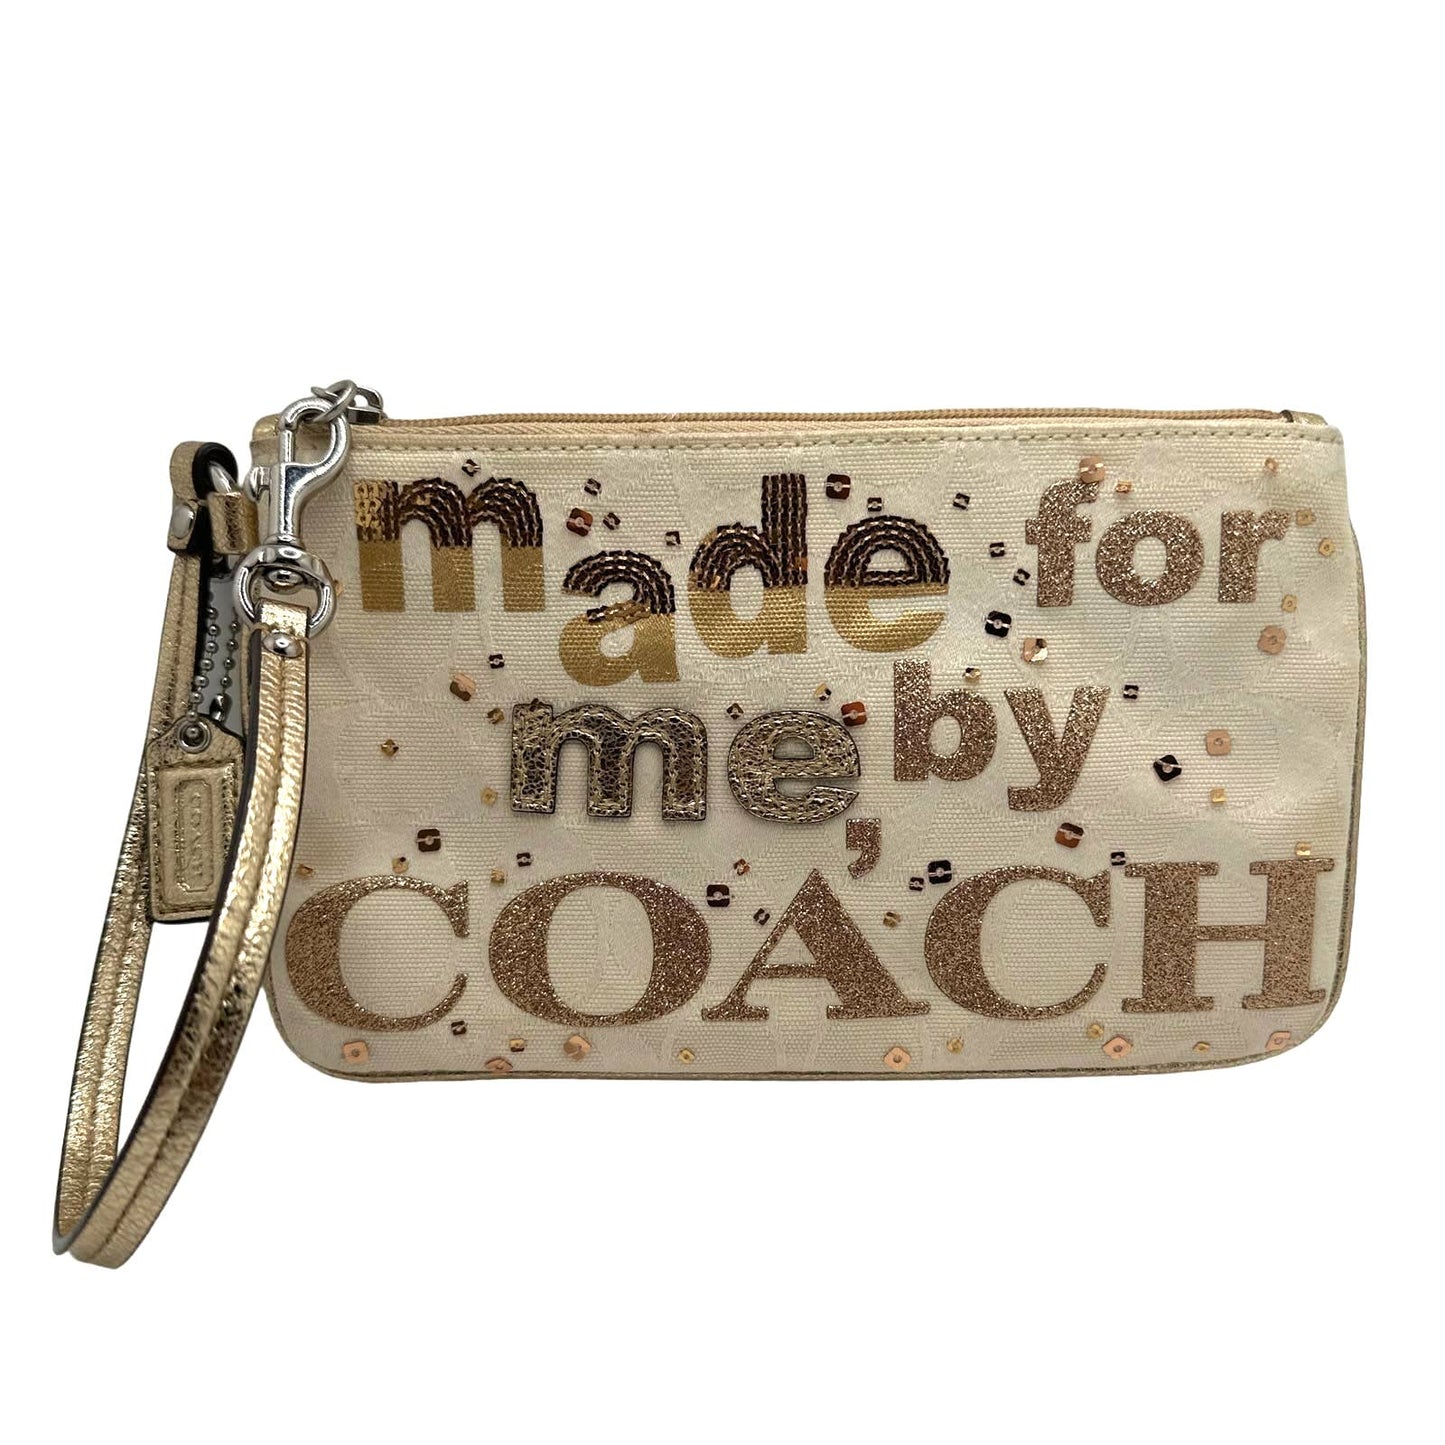 COACH Poppy Made for me by Coach Wristlet